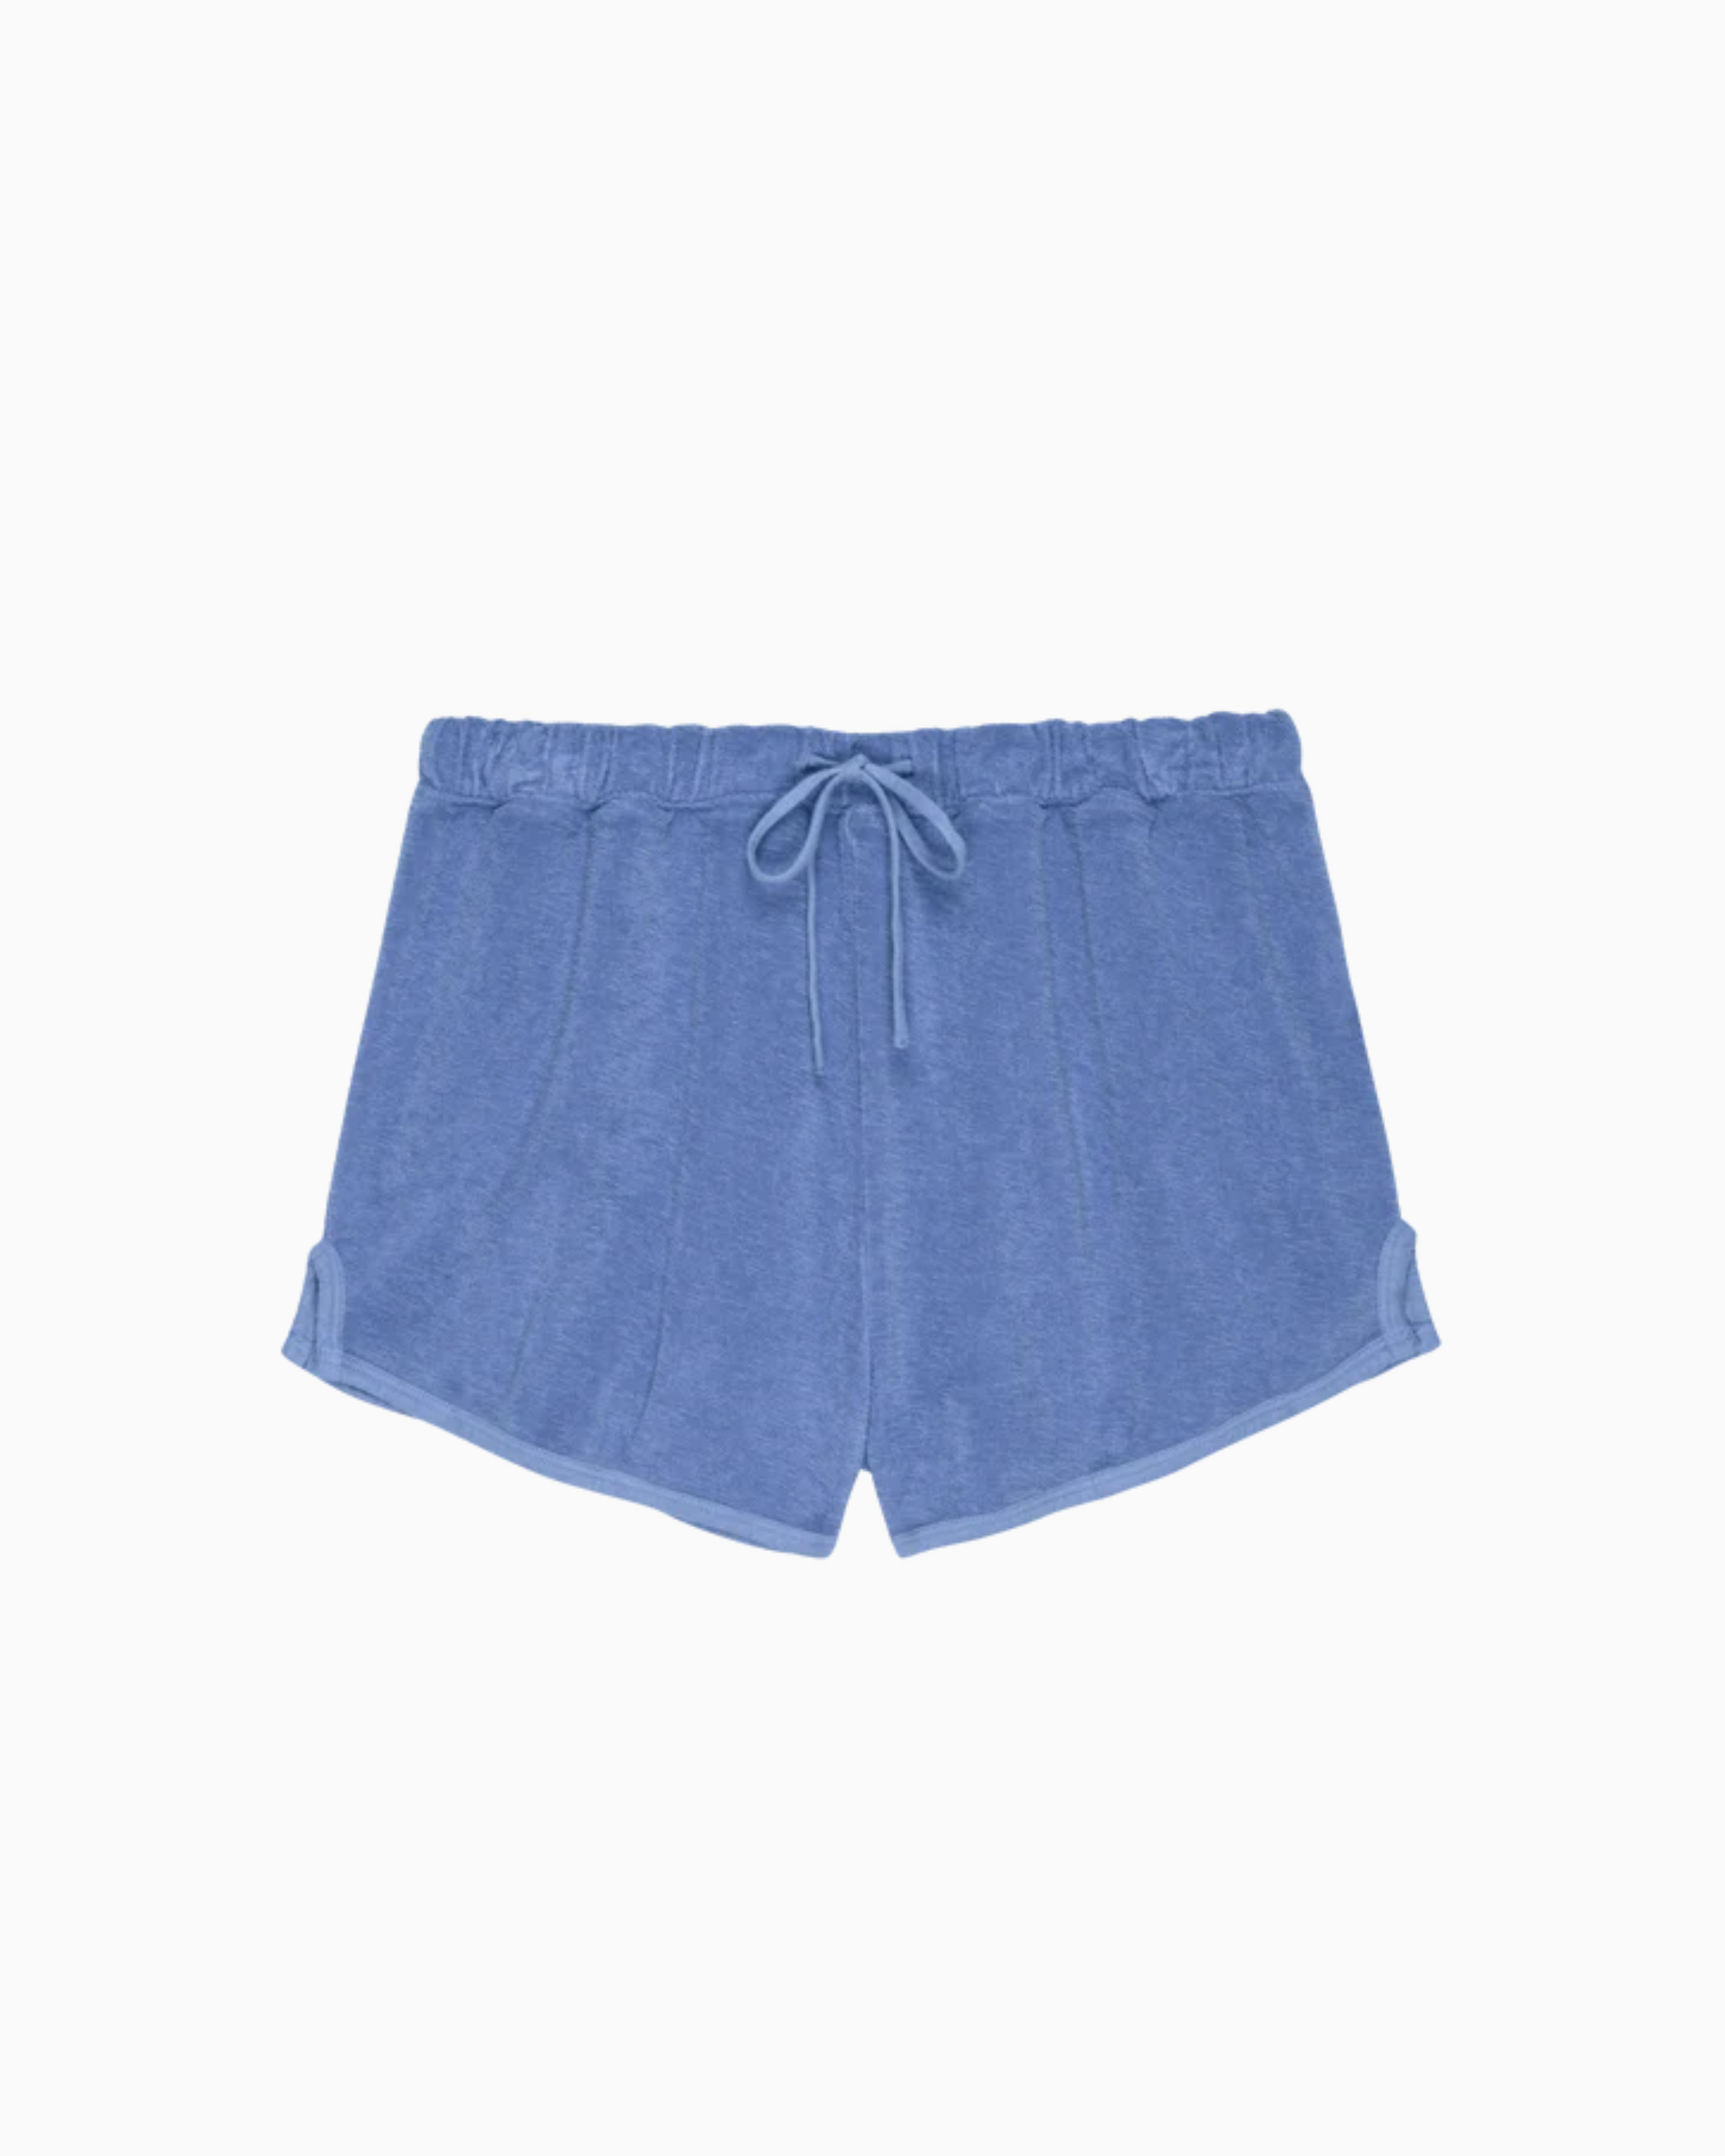 Nation Fern Terry Cloth Short in Wedgewood